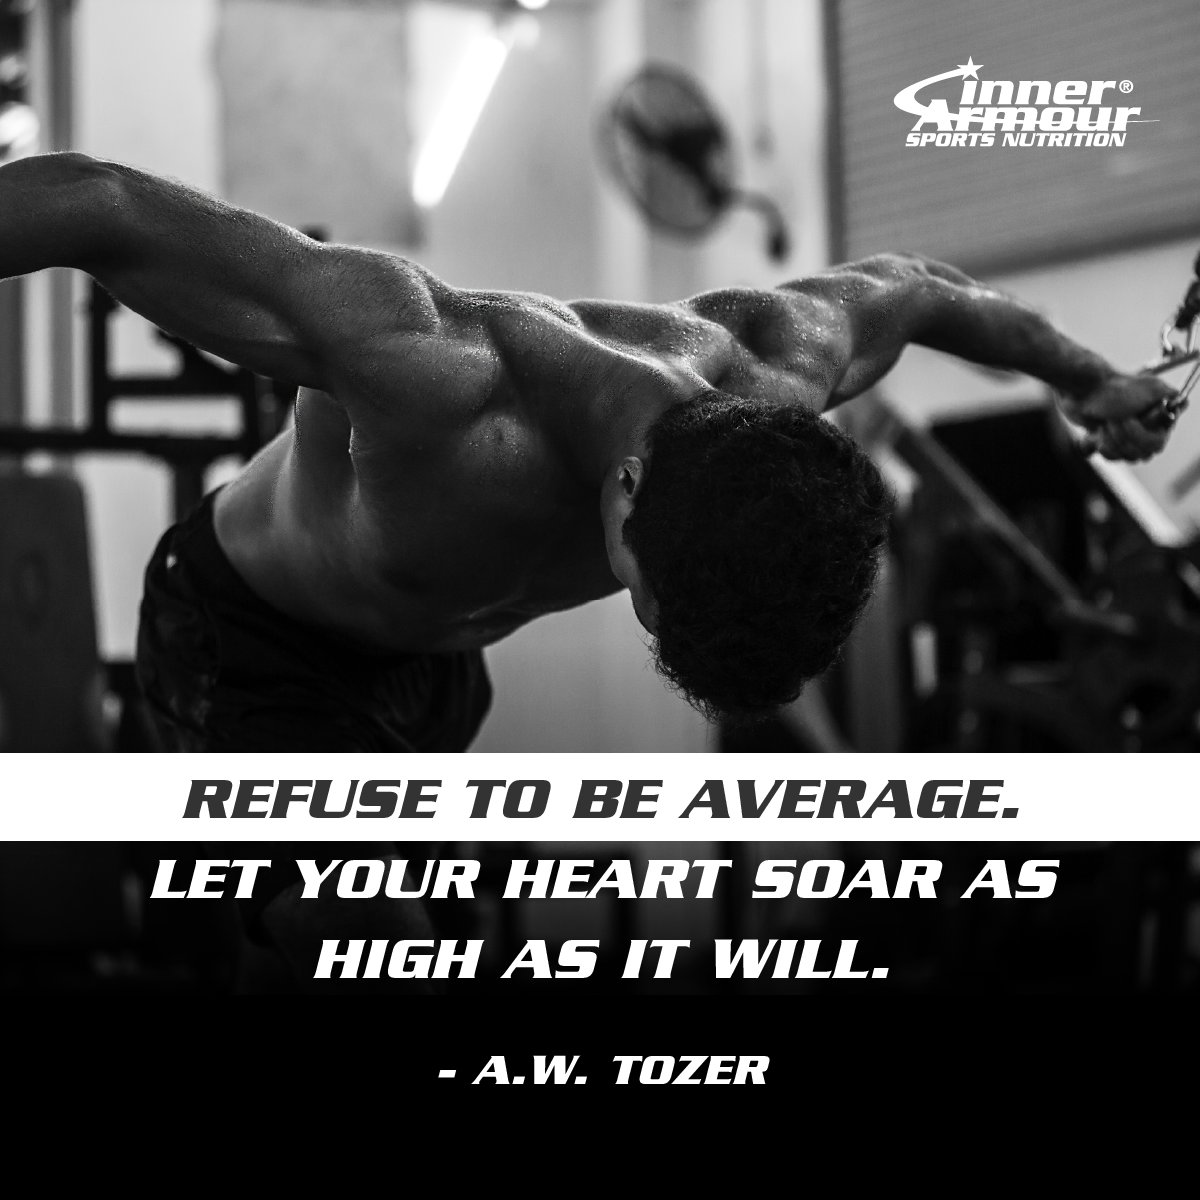 Refuse to be average. Let your heart soar as high as it will. - A.W. Tozer #InnerArmour #StrengthFromWithin #sportsnutrition #indisputableresults